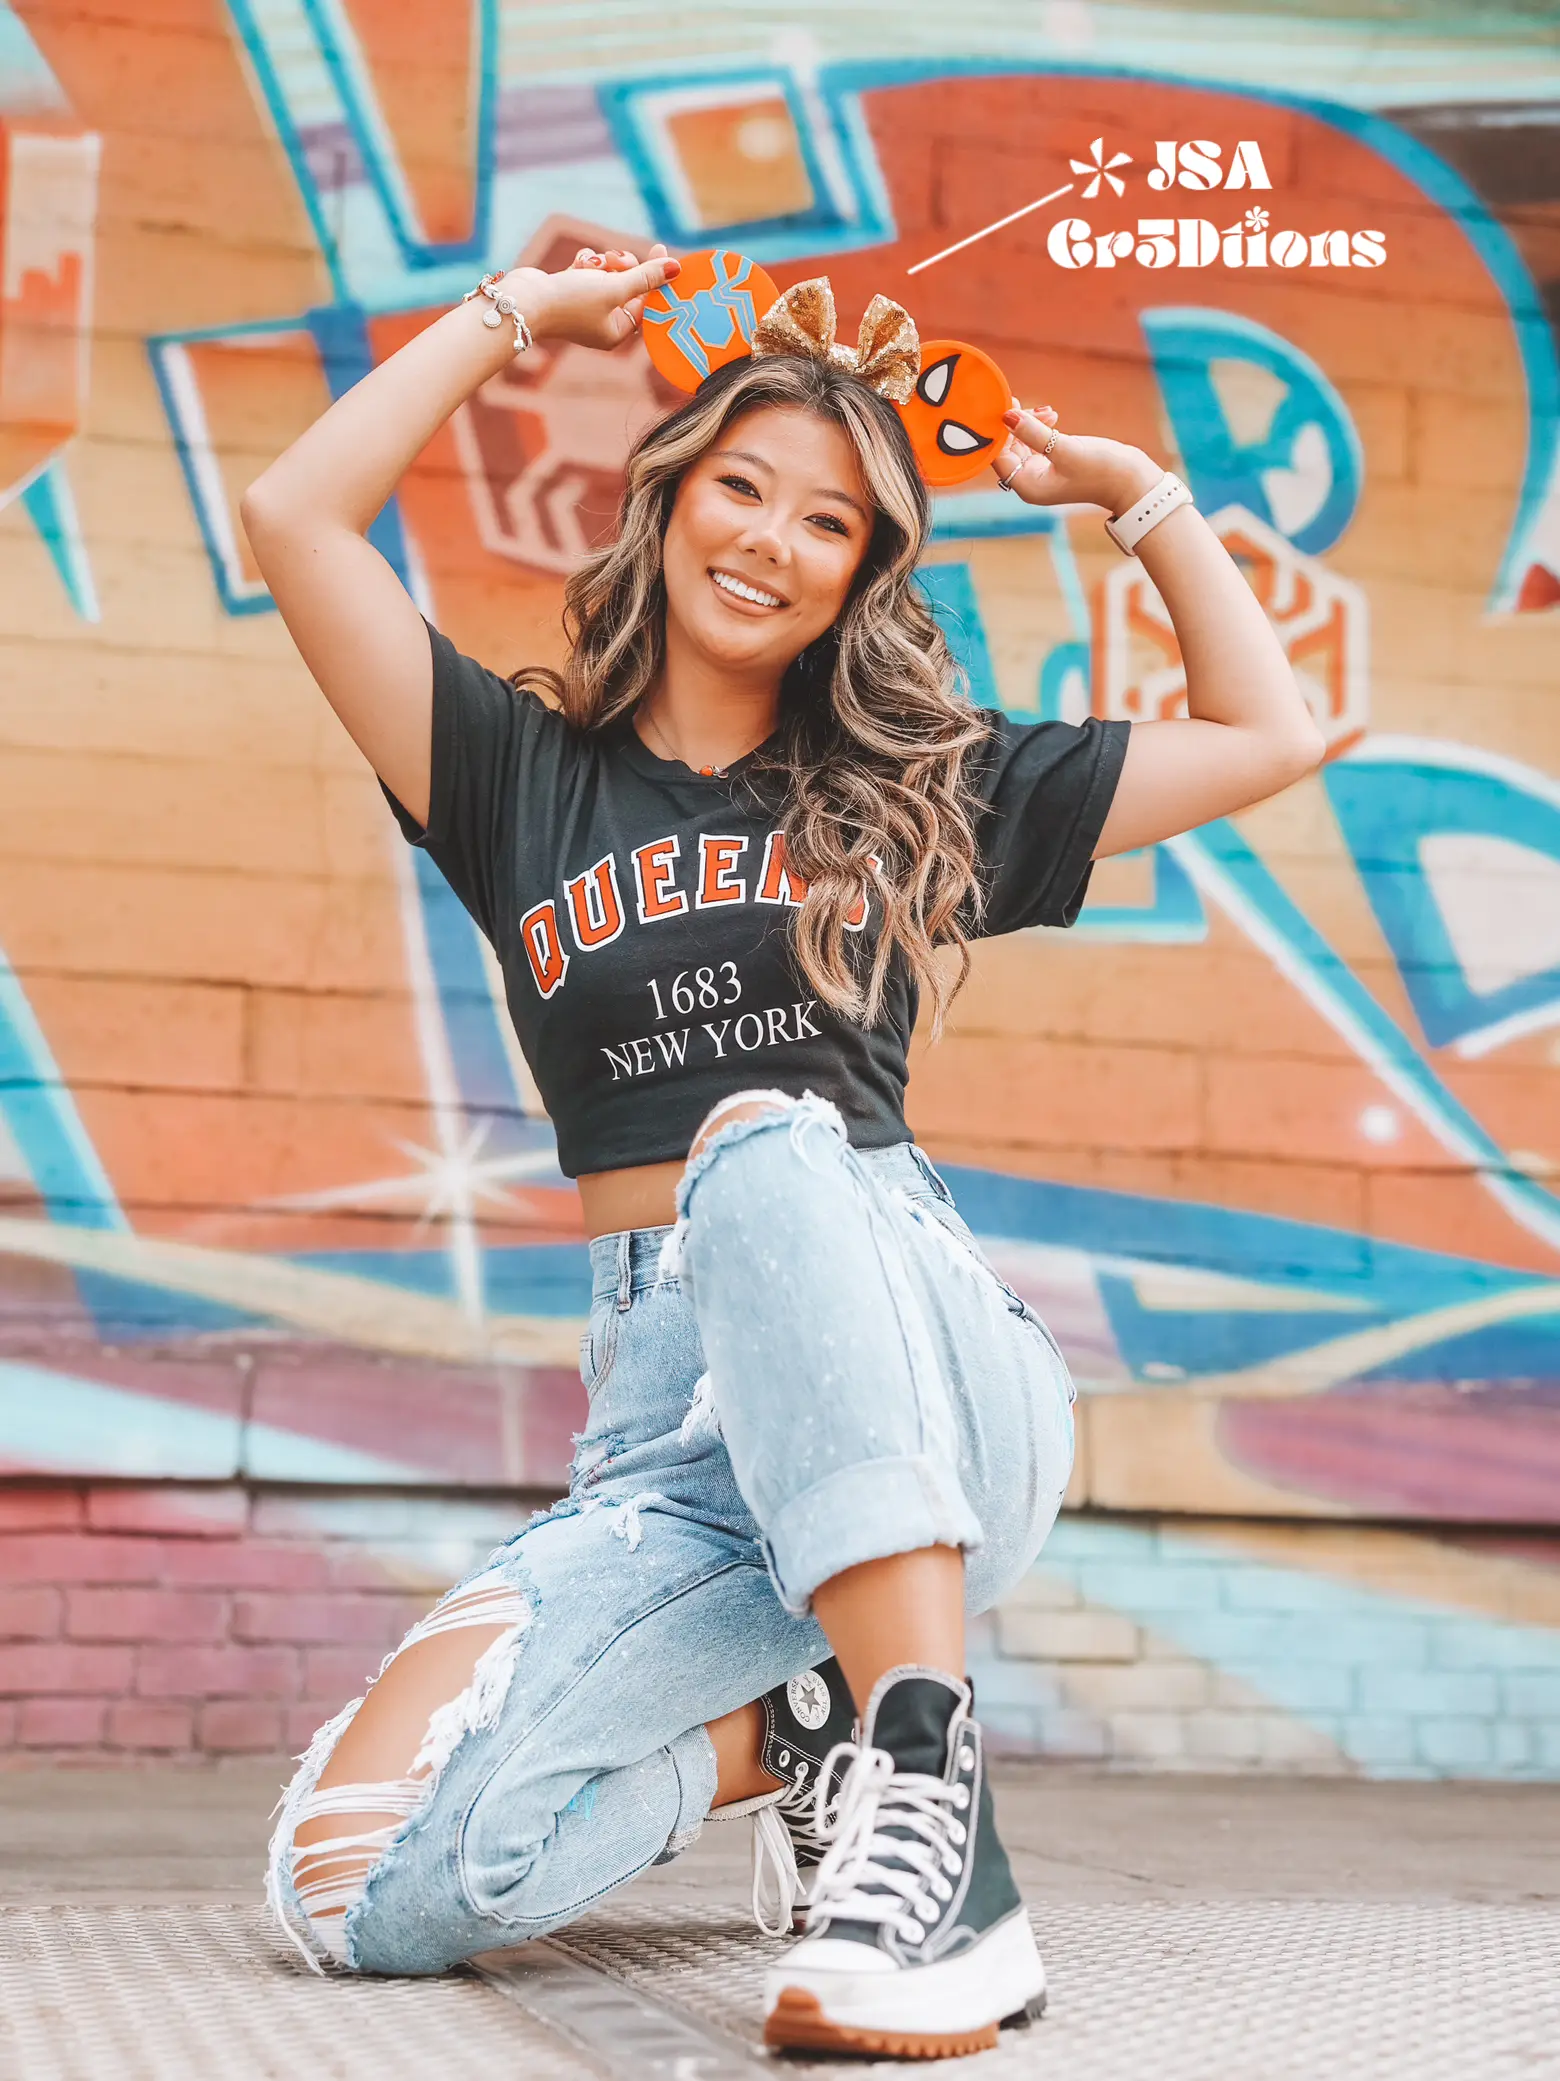  A woman wearing a black shirt with the word New York on it is posing in front of a wall.